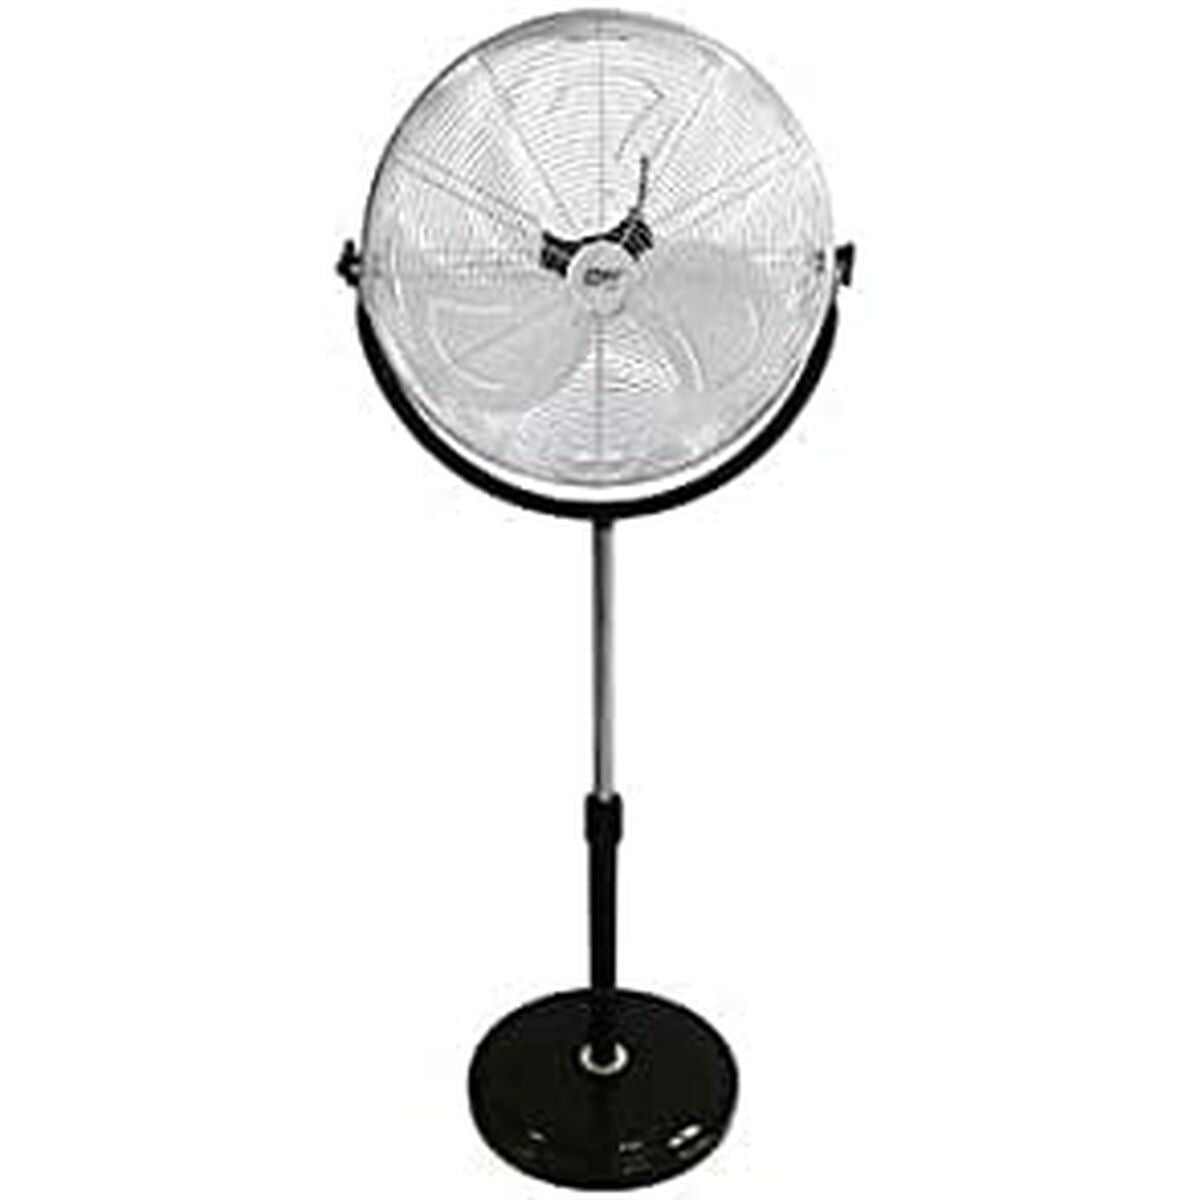 Freestanding Fan EDM Black industrial Silver 120 W, EDM, Home and cooking, Portable air conditioning, freestanding-fan-edm-black-industrial-silver-120-w, Brand_EDM, category-reference-2399, category-reference-2450, category-reference-2451, category-reference-t-19656, category-reference-t-21087, category-reference-t-25217, Condition_NEW, ferretería, Price_100 - 200, summer, RiotNook